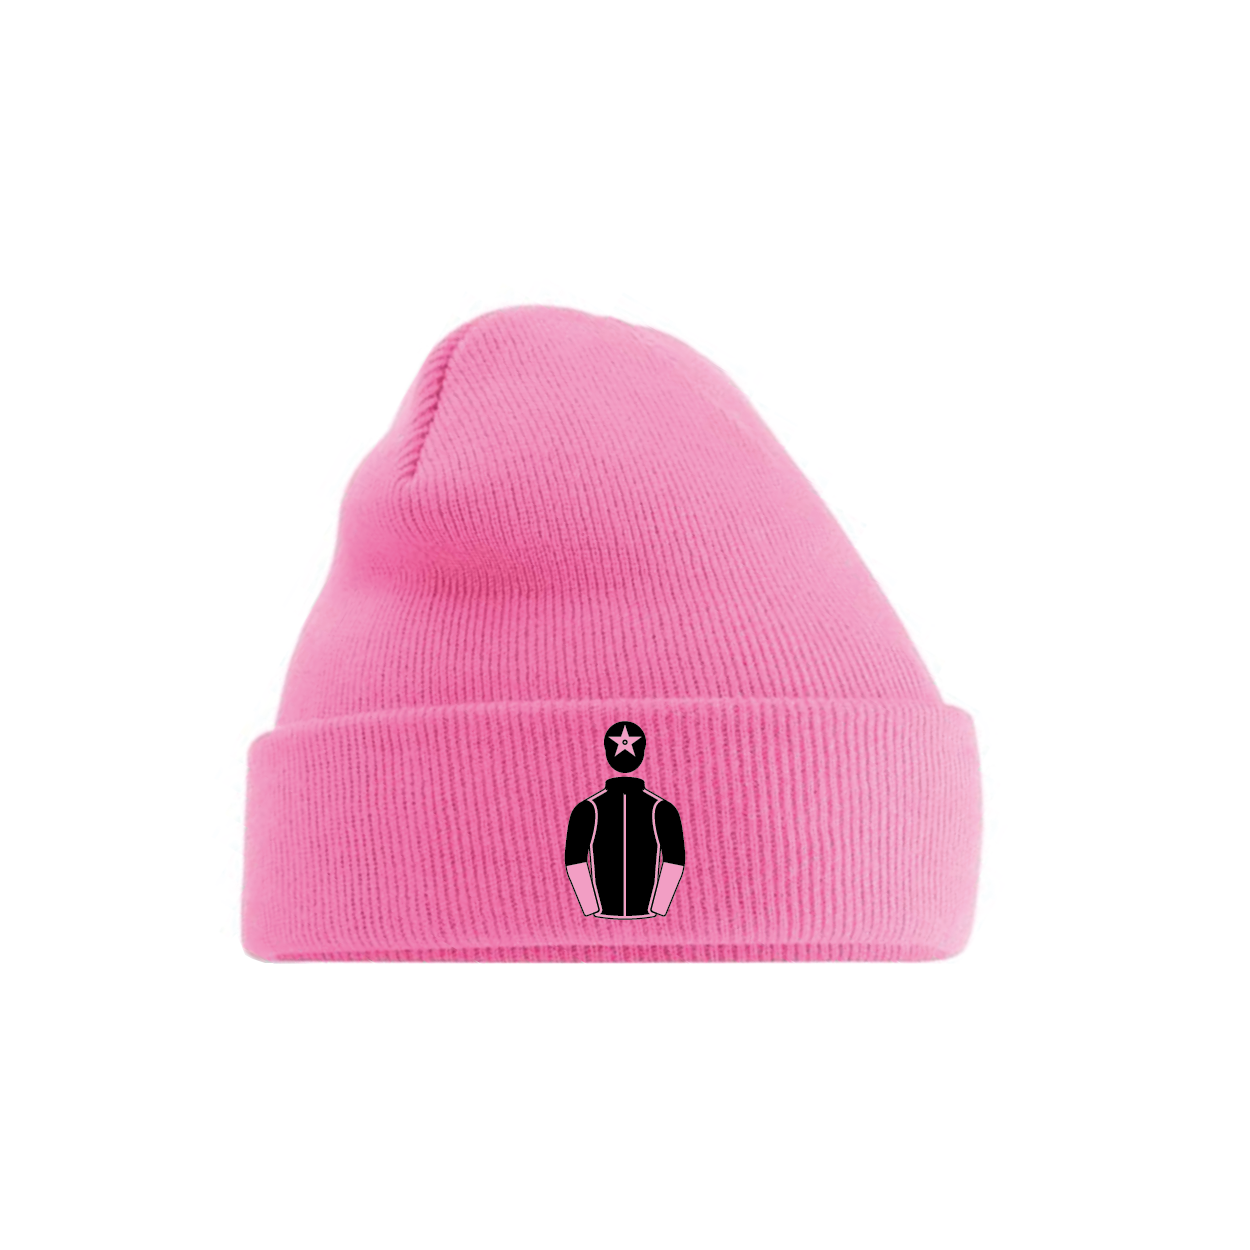 Claudio Michael Grech Embroidered Cuffed Beanie - Hacked Up